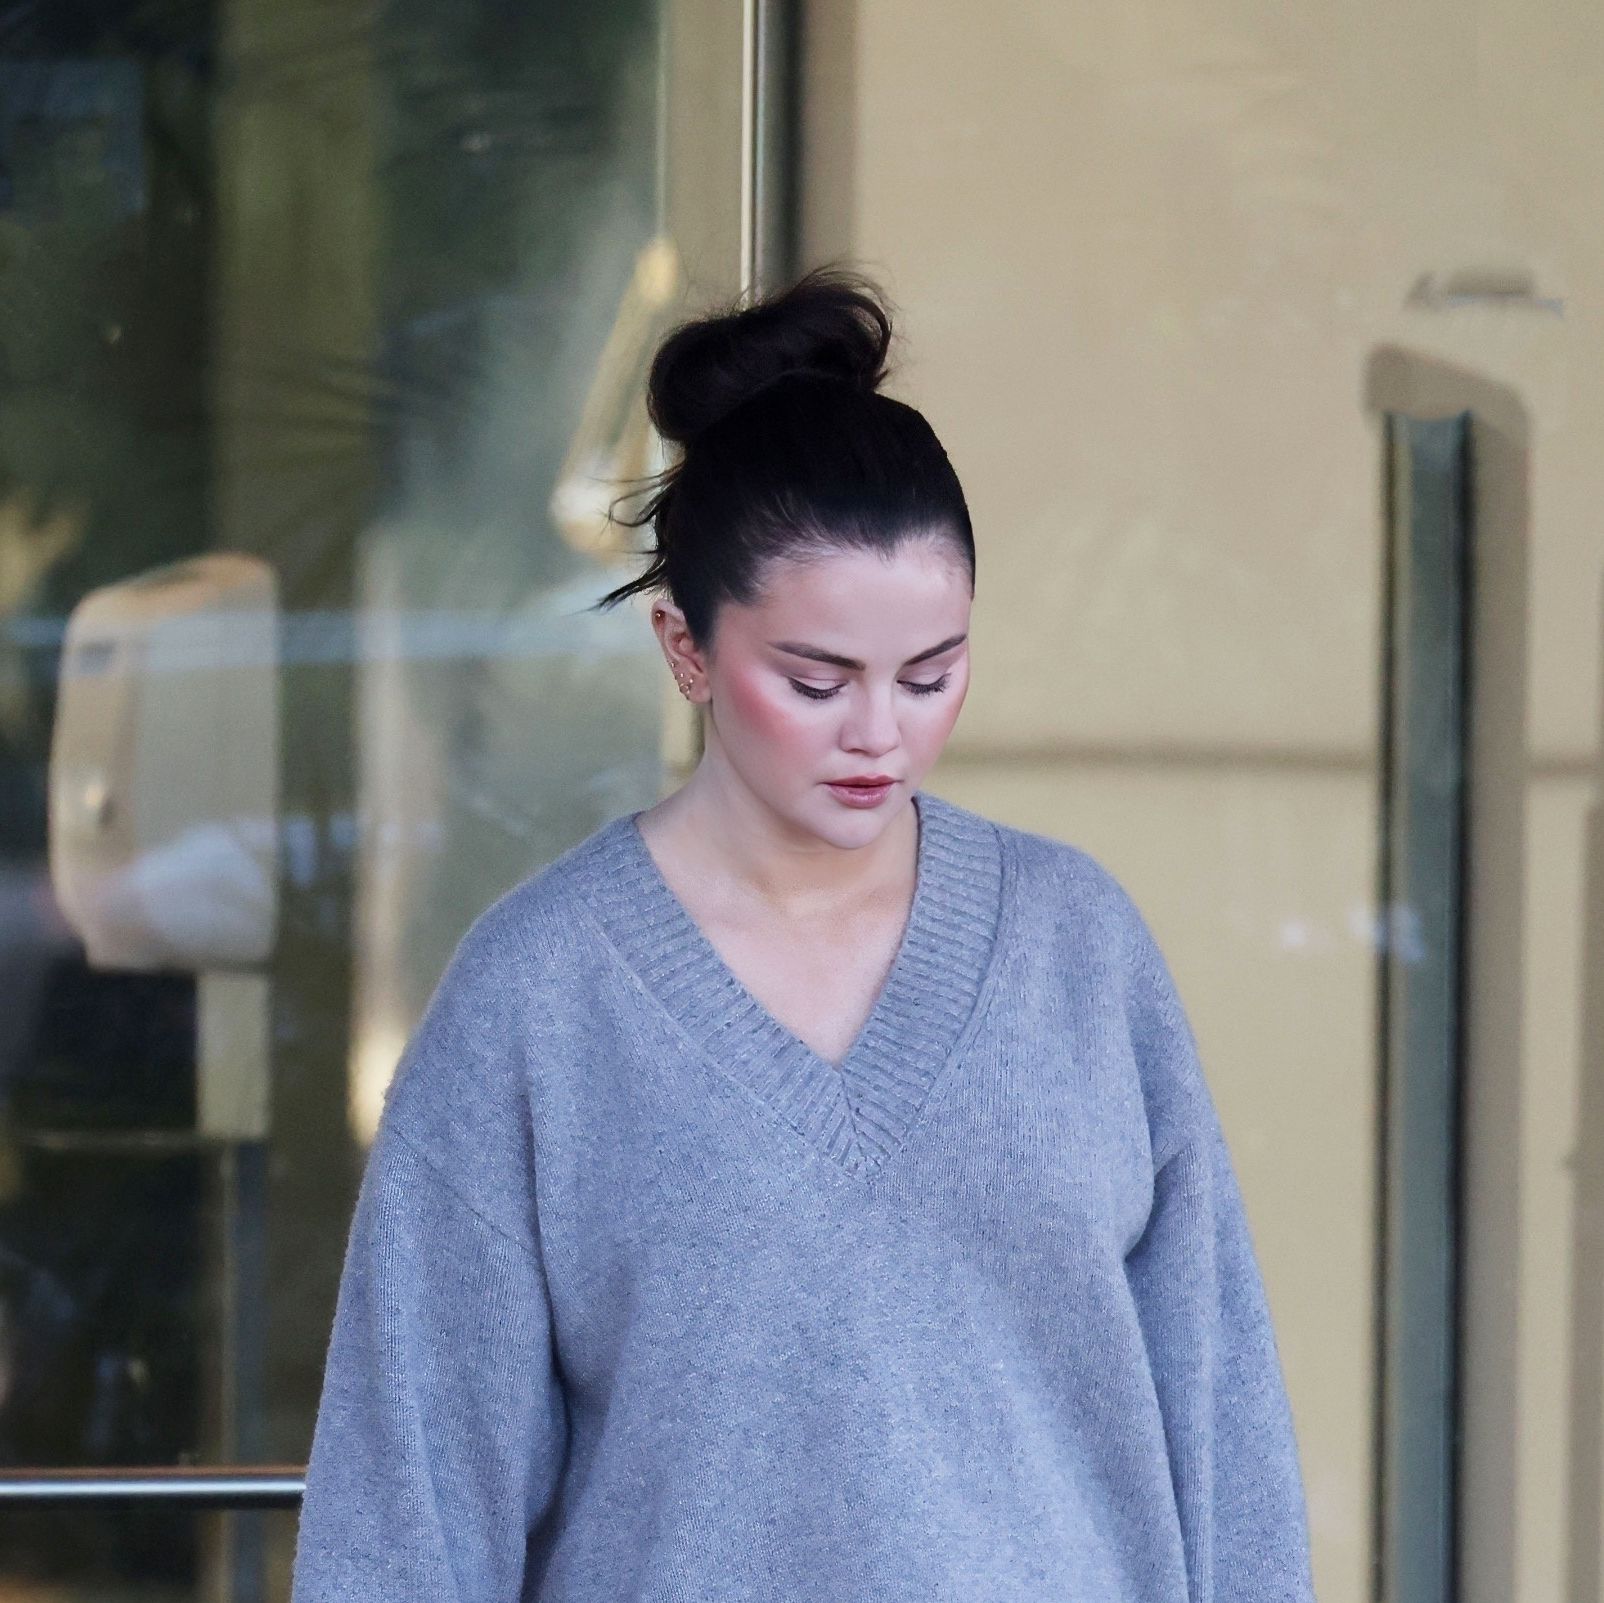 Selena Gomez Shows Off Her Cozy Work Attire in a Reformation Sweater